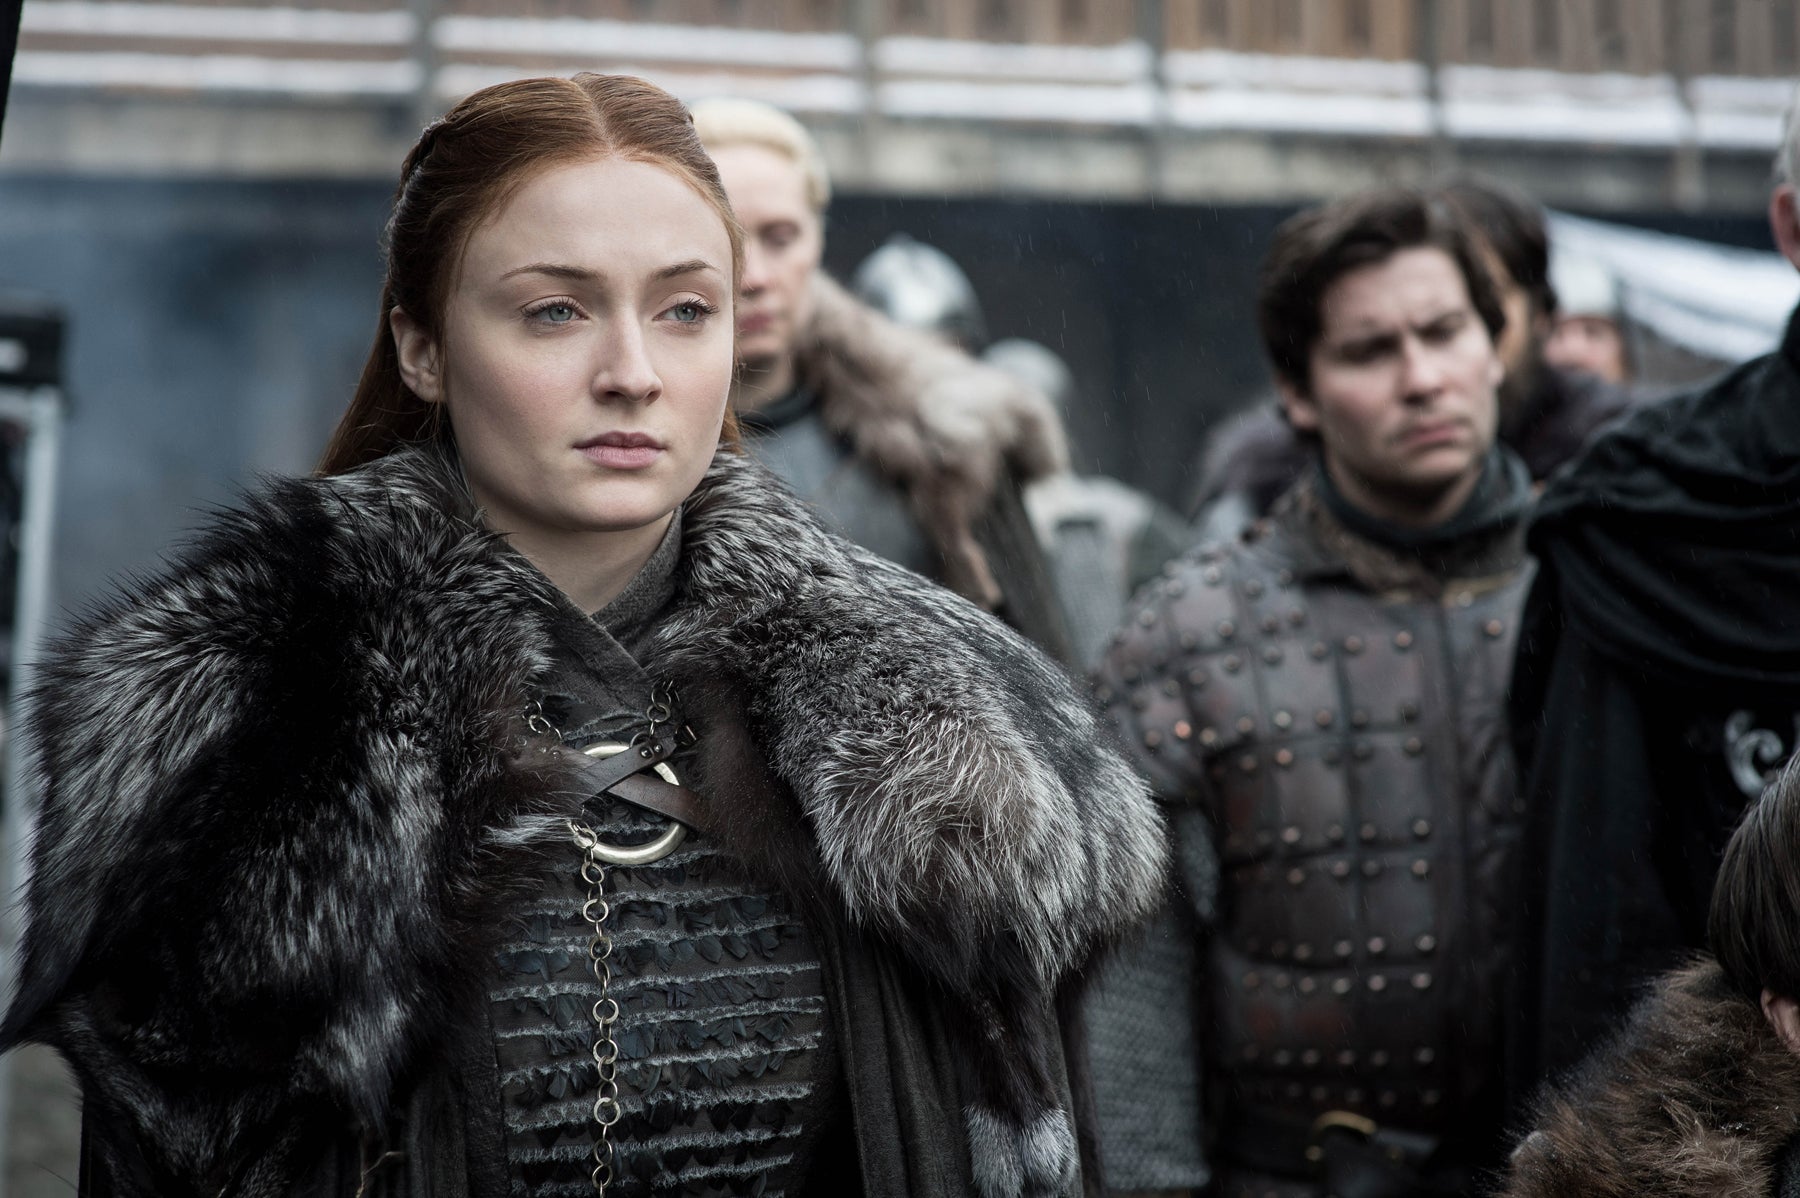 Sansa Stark stands in the courtyard of Winterfell, with Podrick and Brienne of Tarth in the background. Sansa looks off camera, glaring at someone approaching.